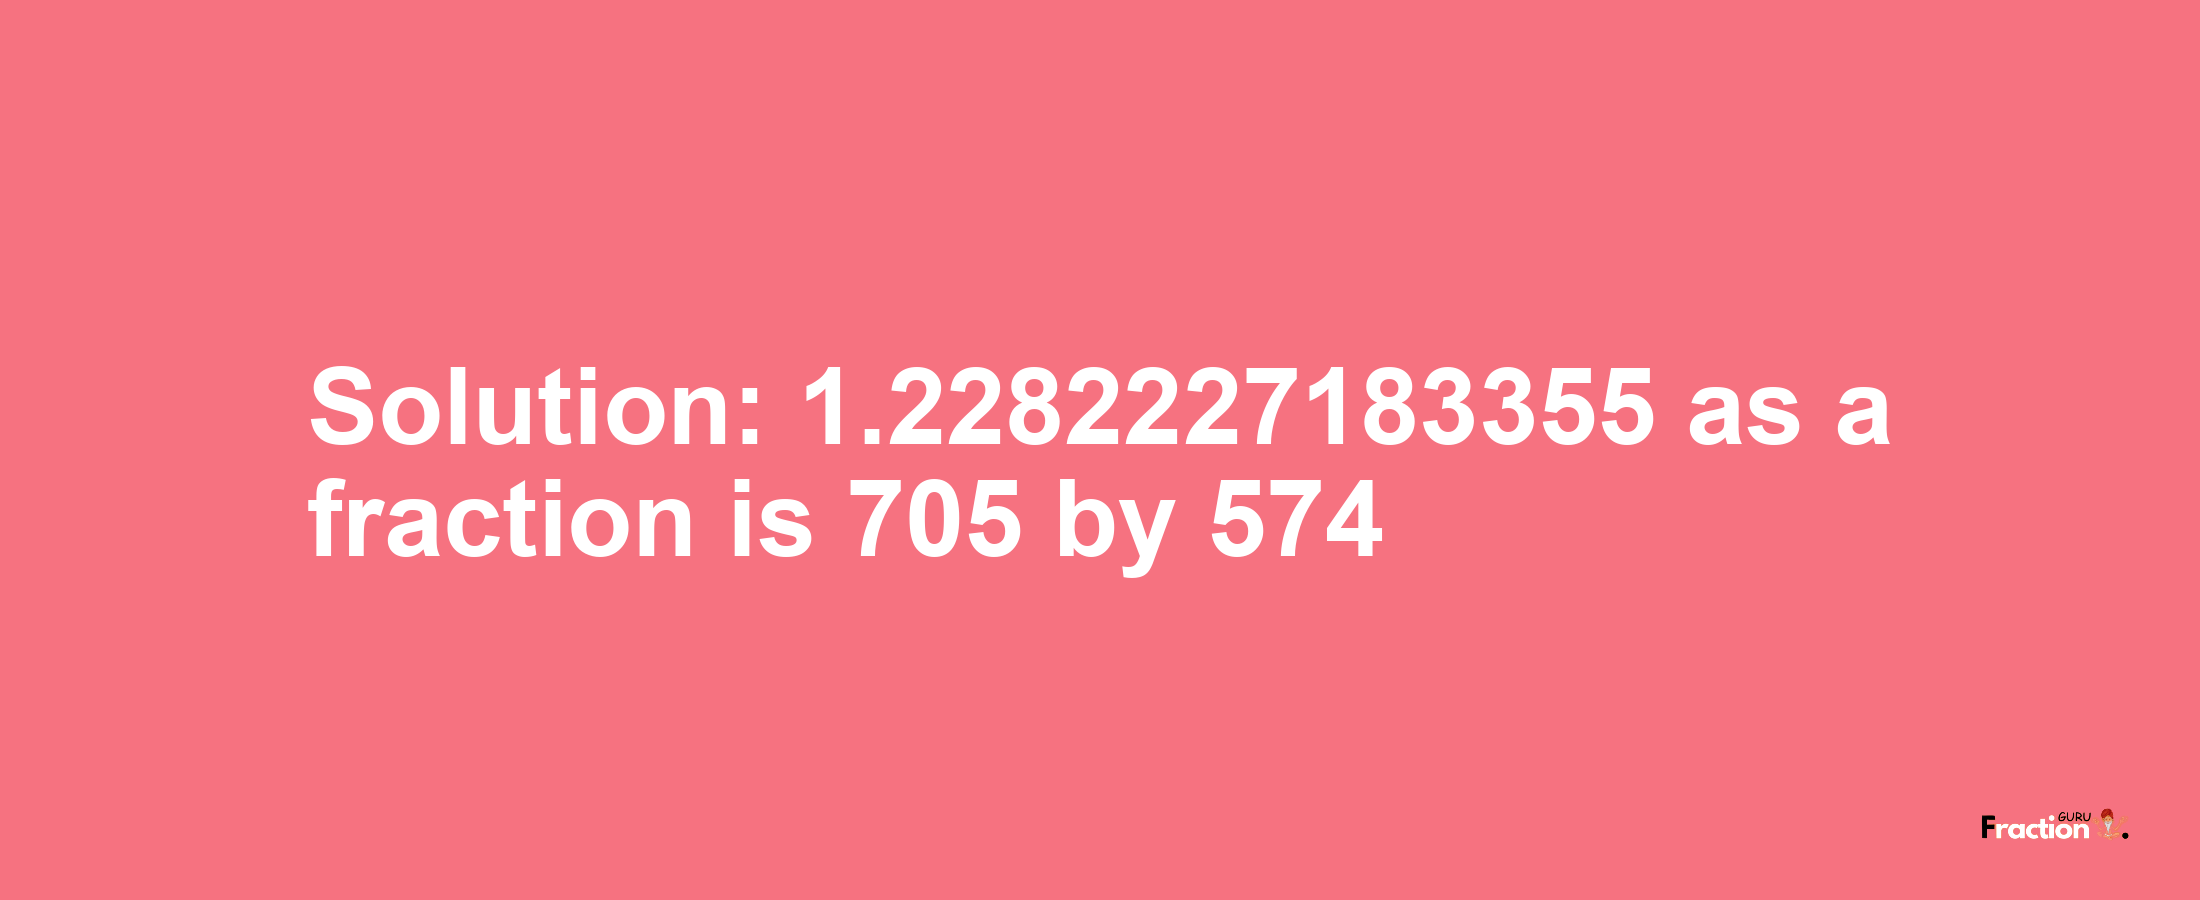 Solution:1.2282227183355 as a fraction is 705/574